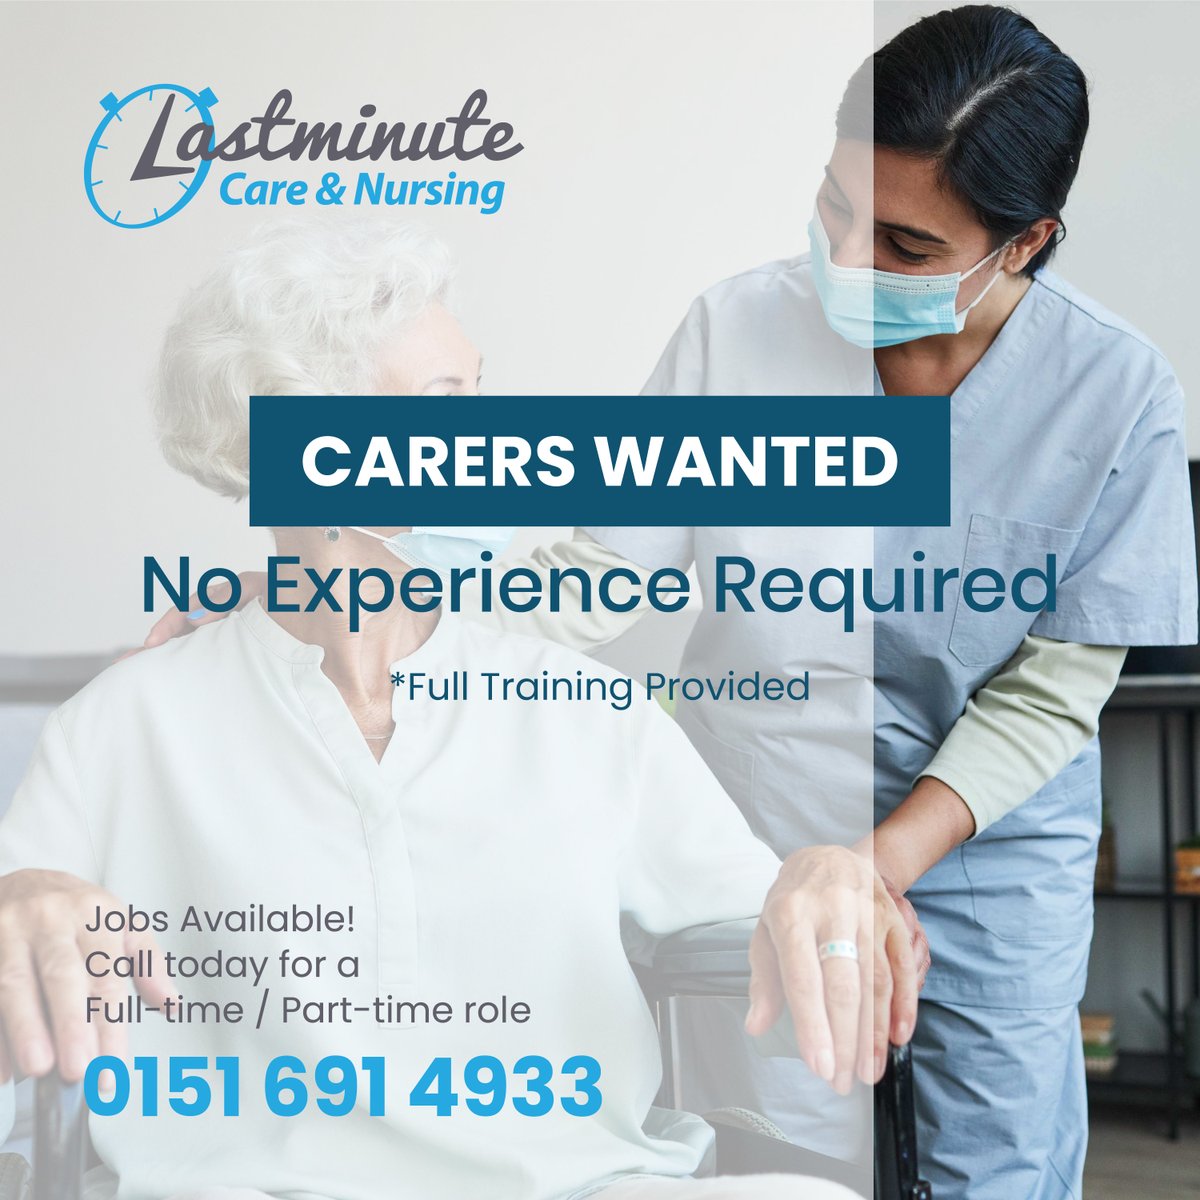 Calling all carers! If you're looking for an opportunity to make a difference in the lives of those in need, then this could be the perfect job for you.
#caregivingjob #caregiverjob #jobsincare #jobsinhealthcare #carejob #jobsinsocialcare #carerjobs #homecarejobs #socialcarejobs